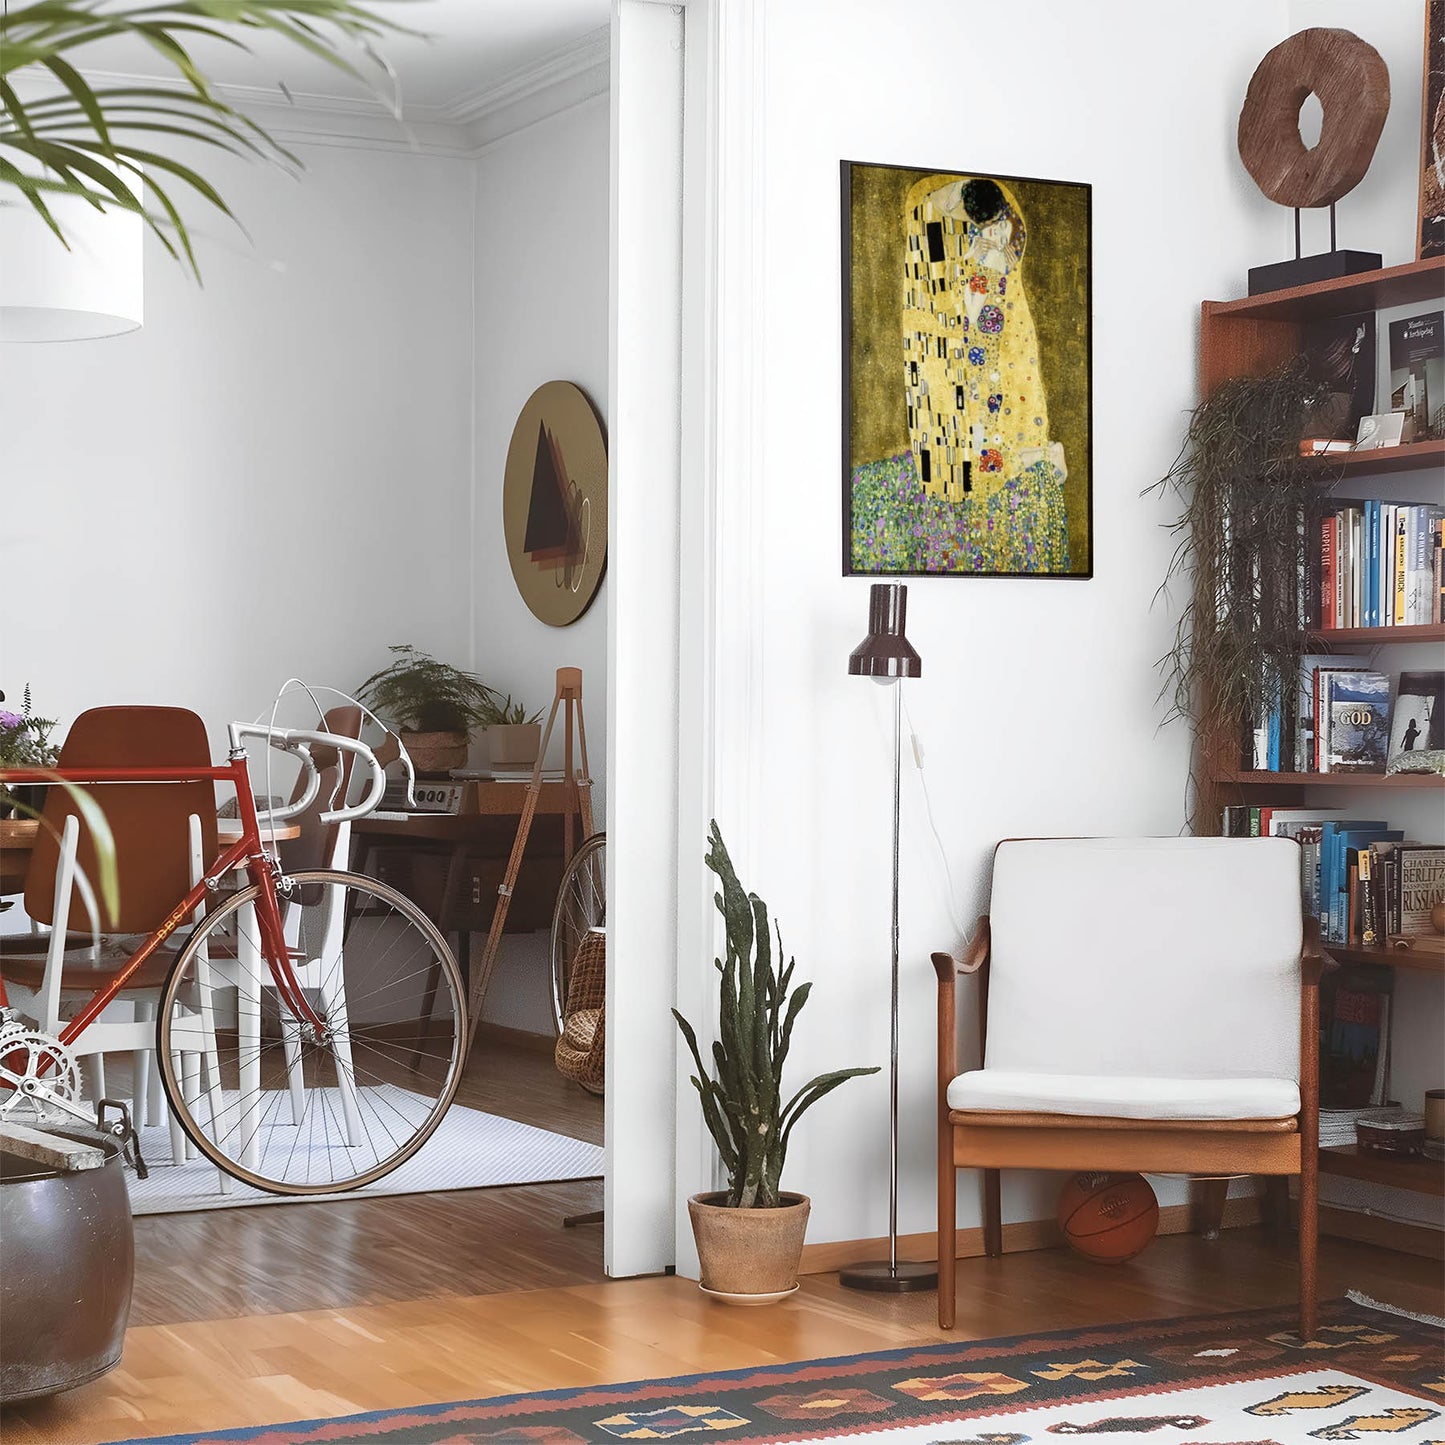 Eclectic living room with a road bike, bookshelf and house plants that features framed artwork of a Two Lovers Embracing in a Kiss Wearing Gold Robes above a chair and lamp